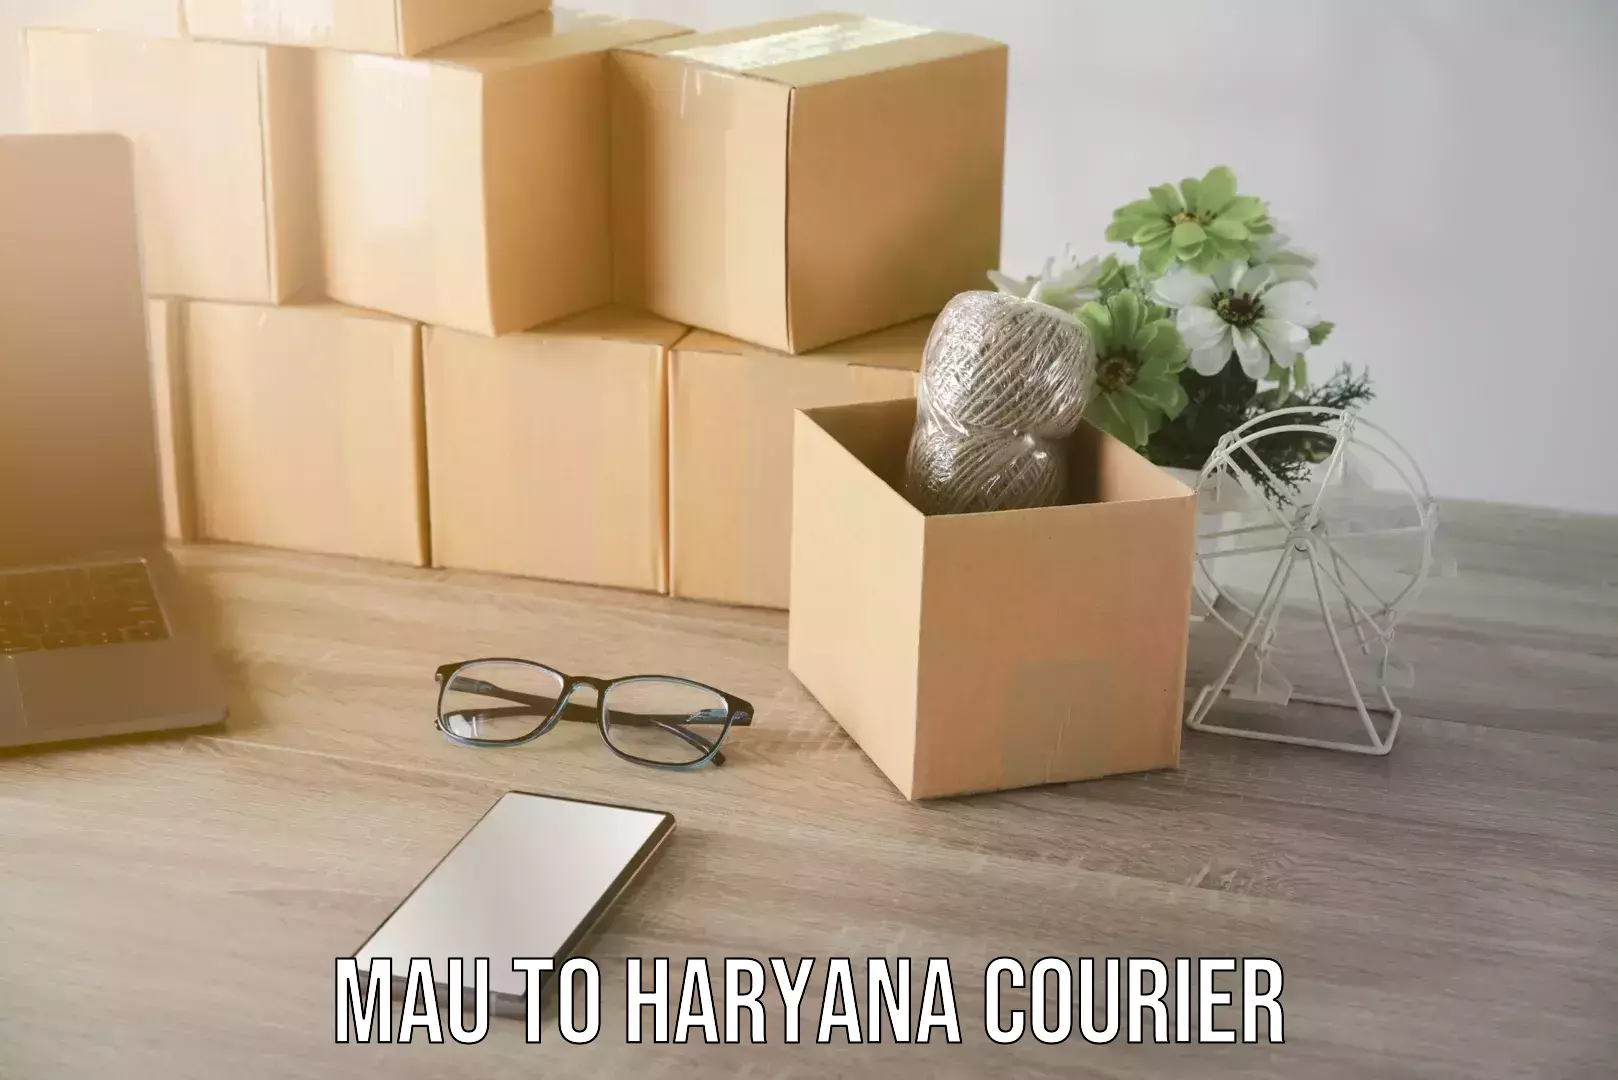 Trusted relocation experts Mau to Haryana